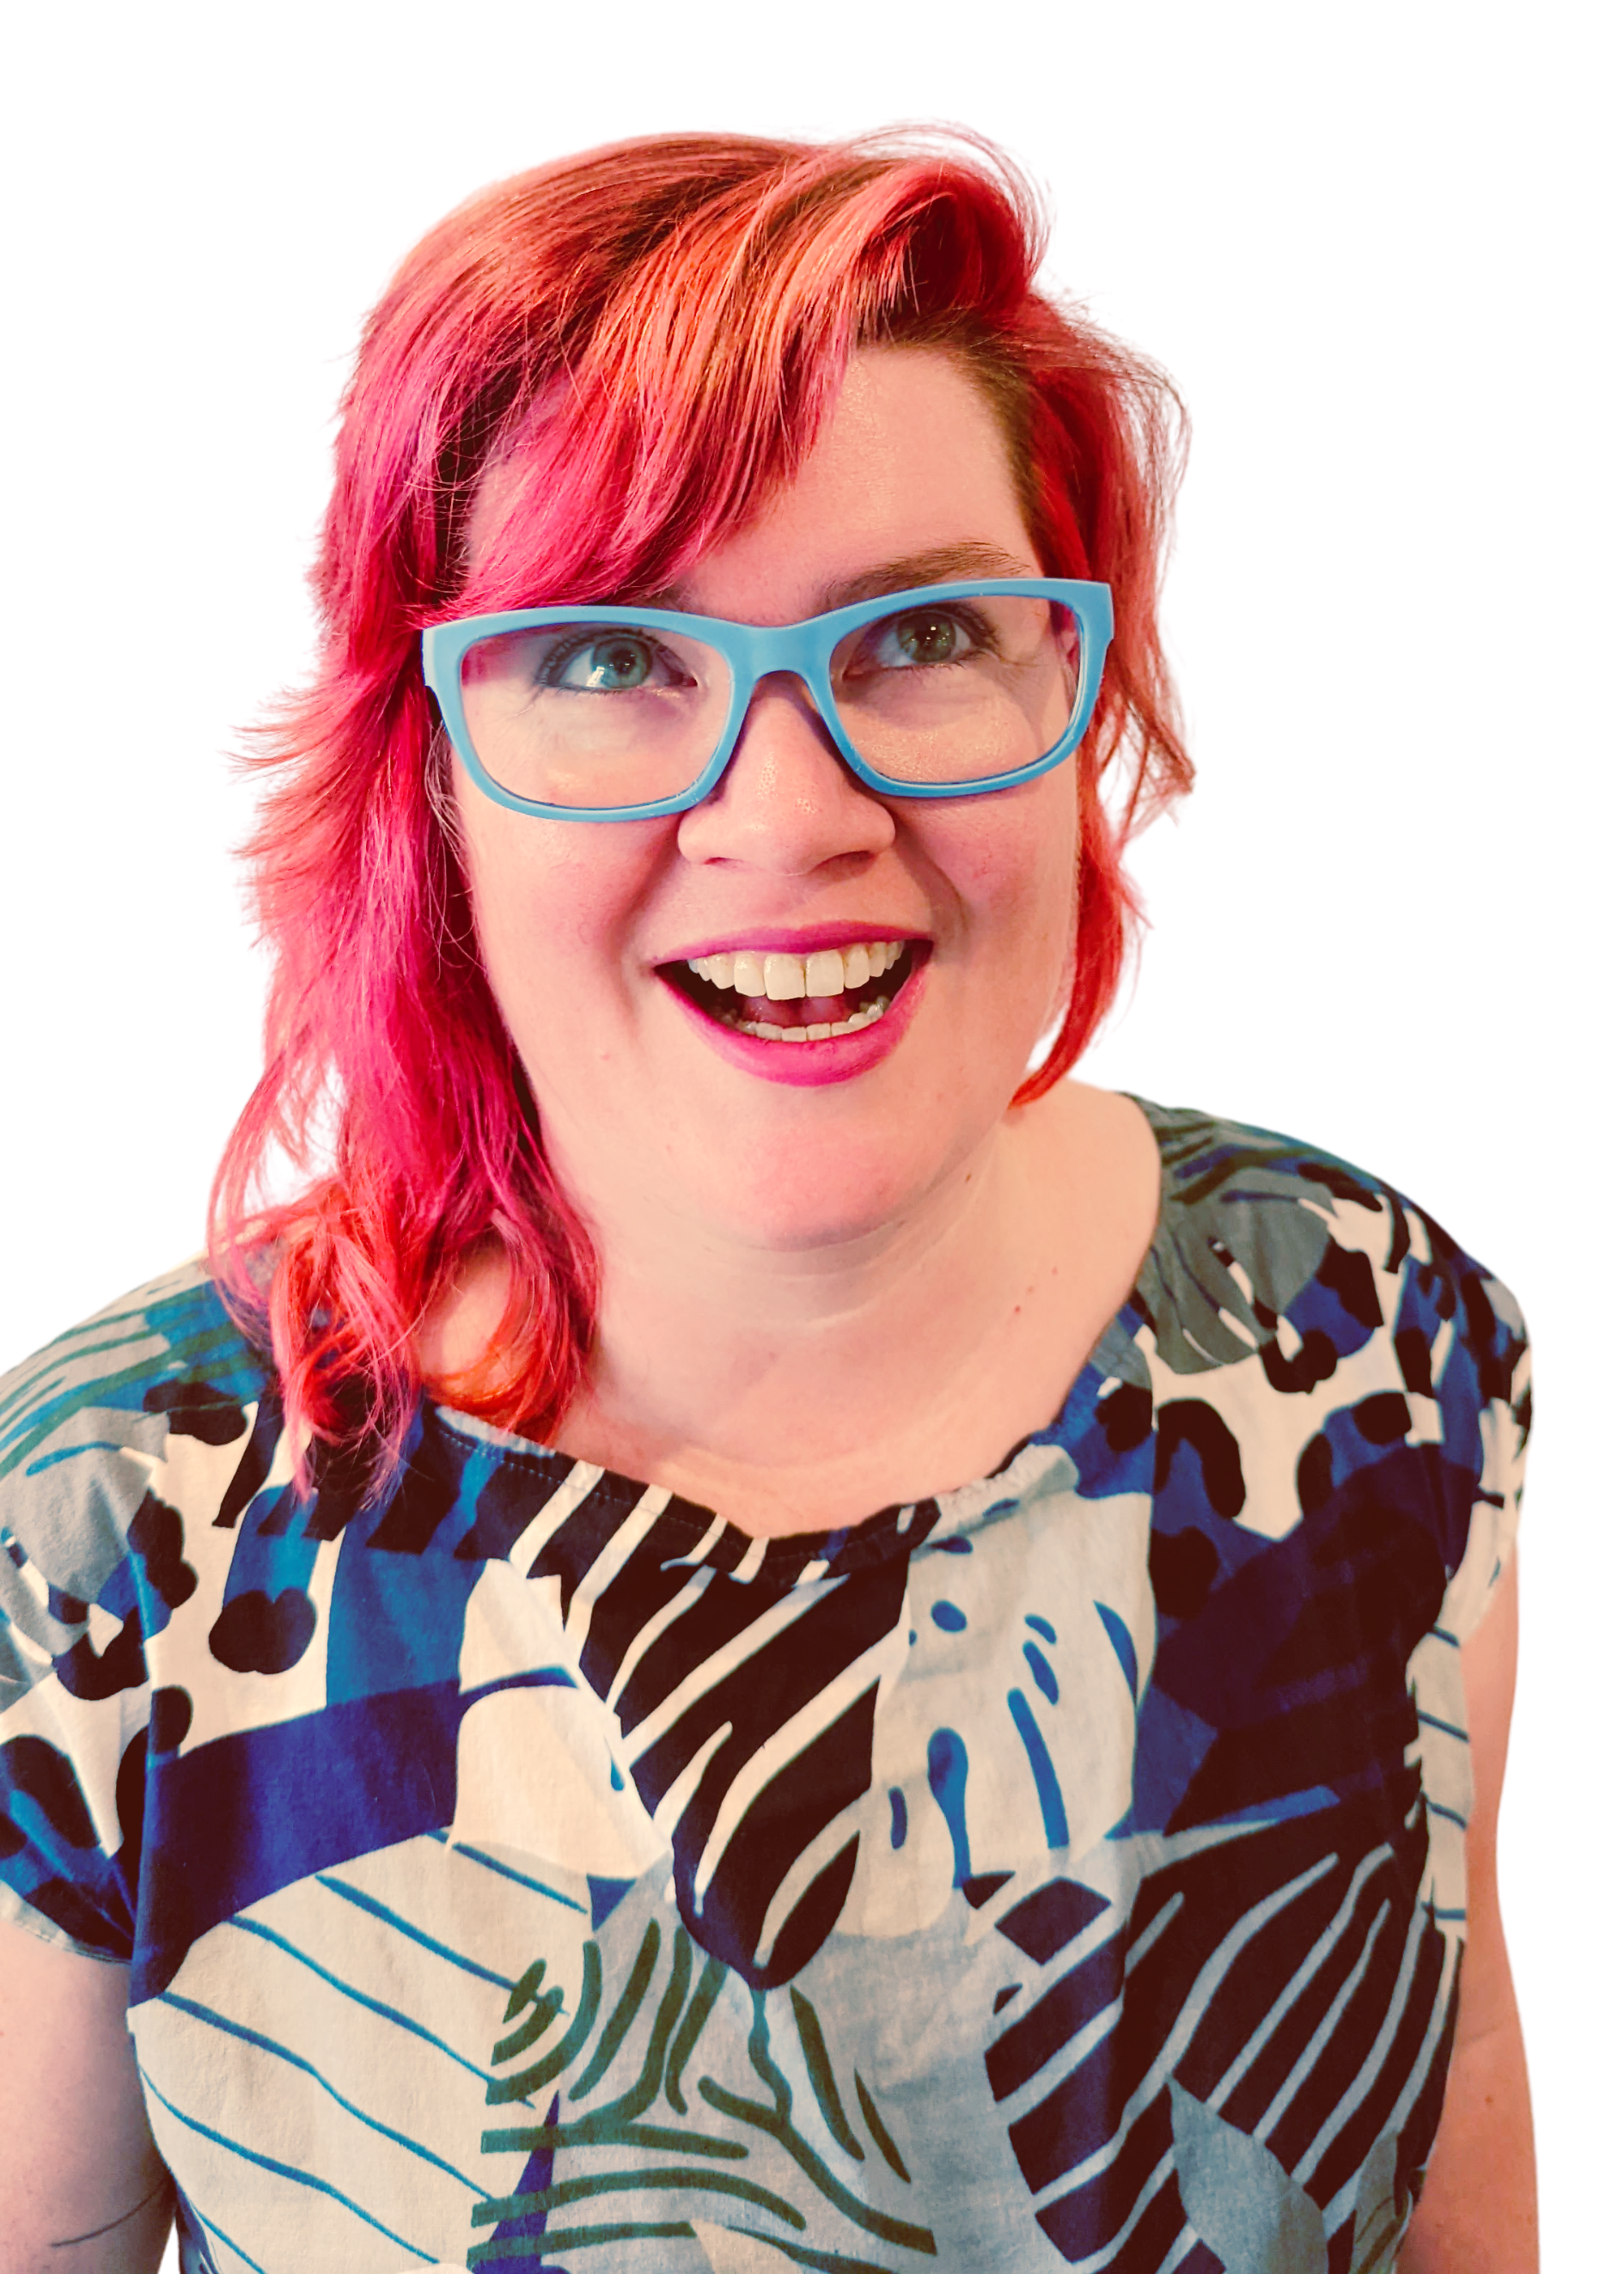 A photo of Amanda. She has bright red hair, blue glasses, and wearing a jungle patterned jumpsuit. She is smiling and looking upward